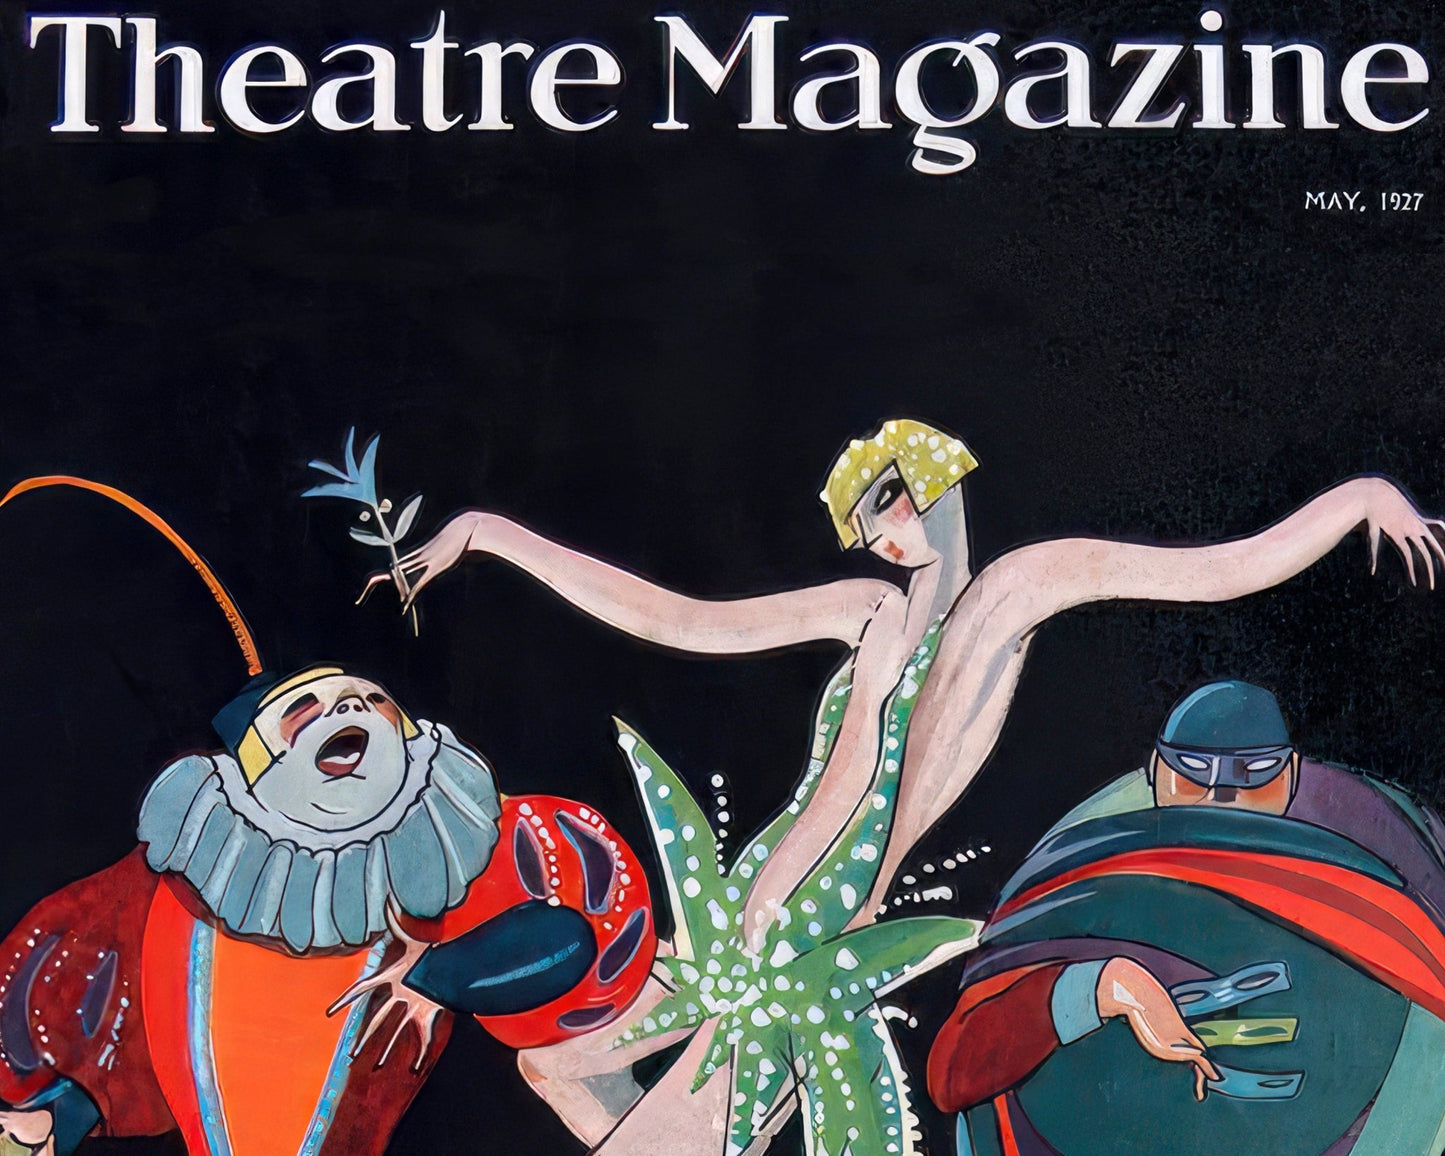 Pol Rab "Theatre Magazine Cover - May 1927" - Mabon Gallery